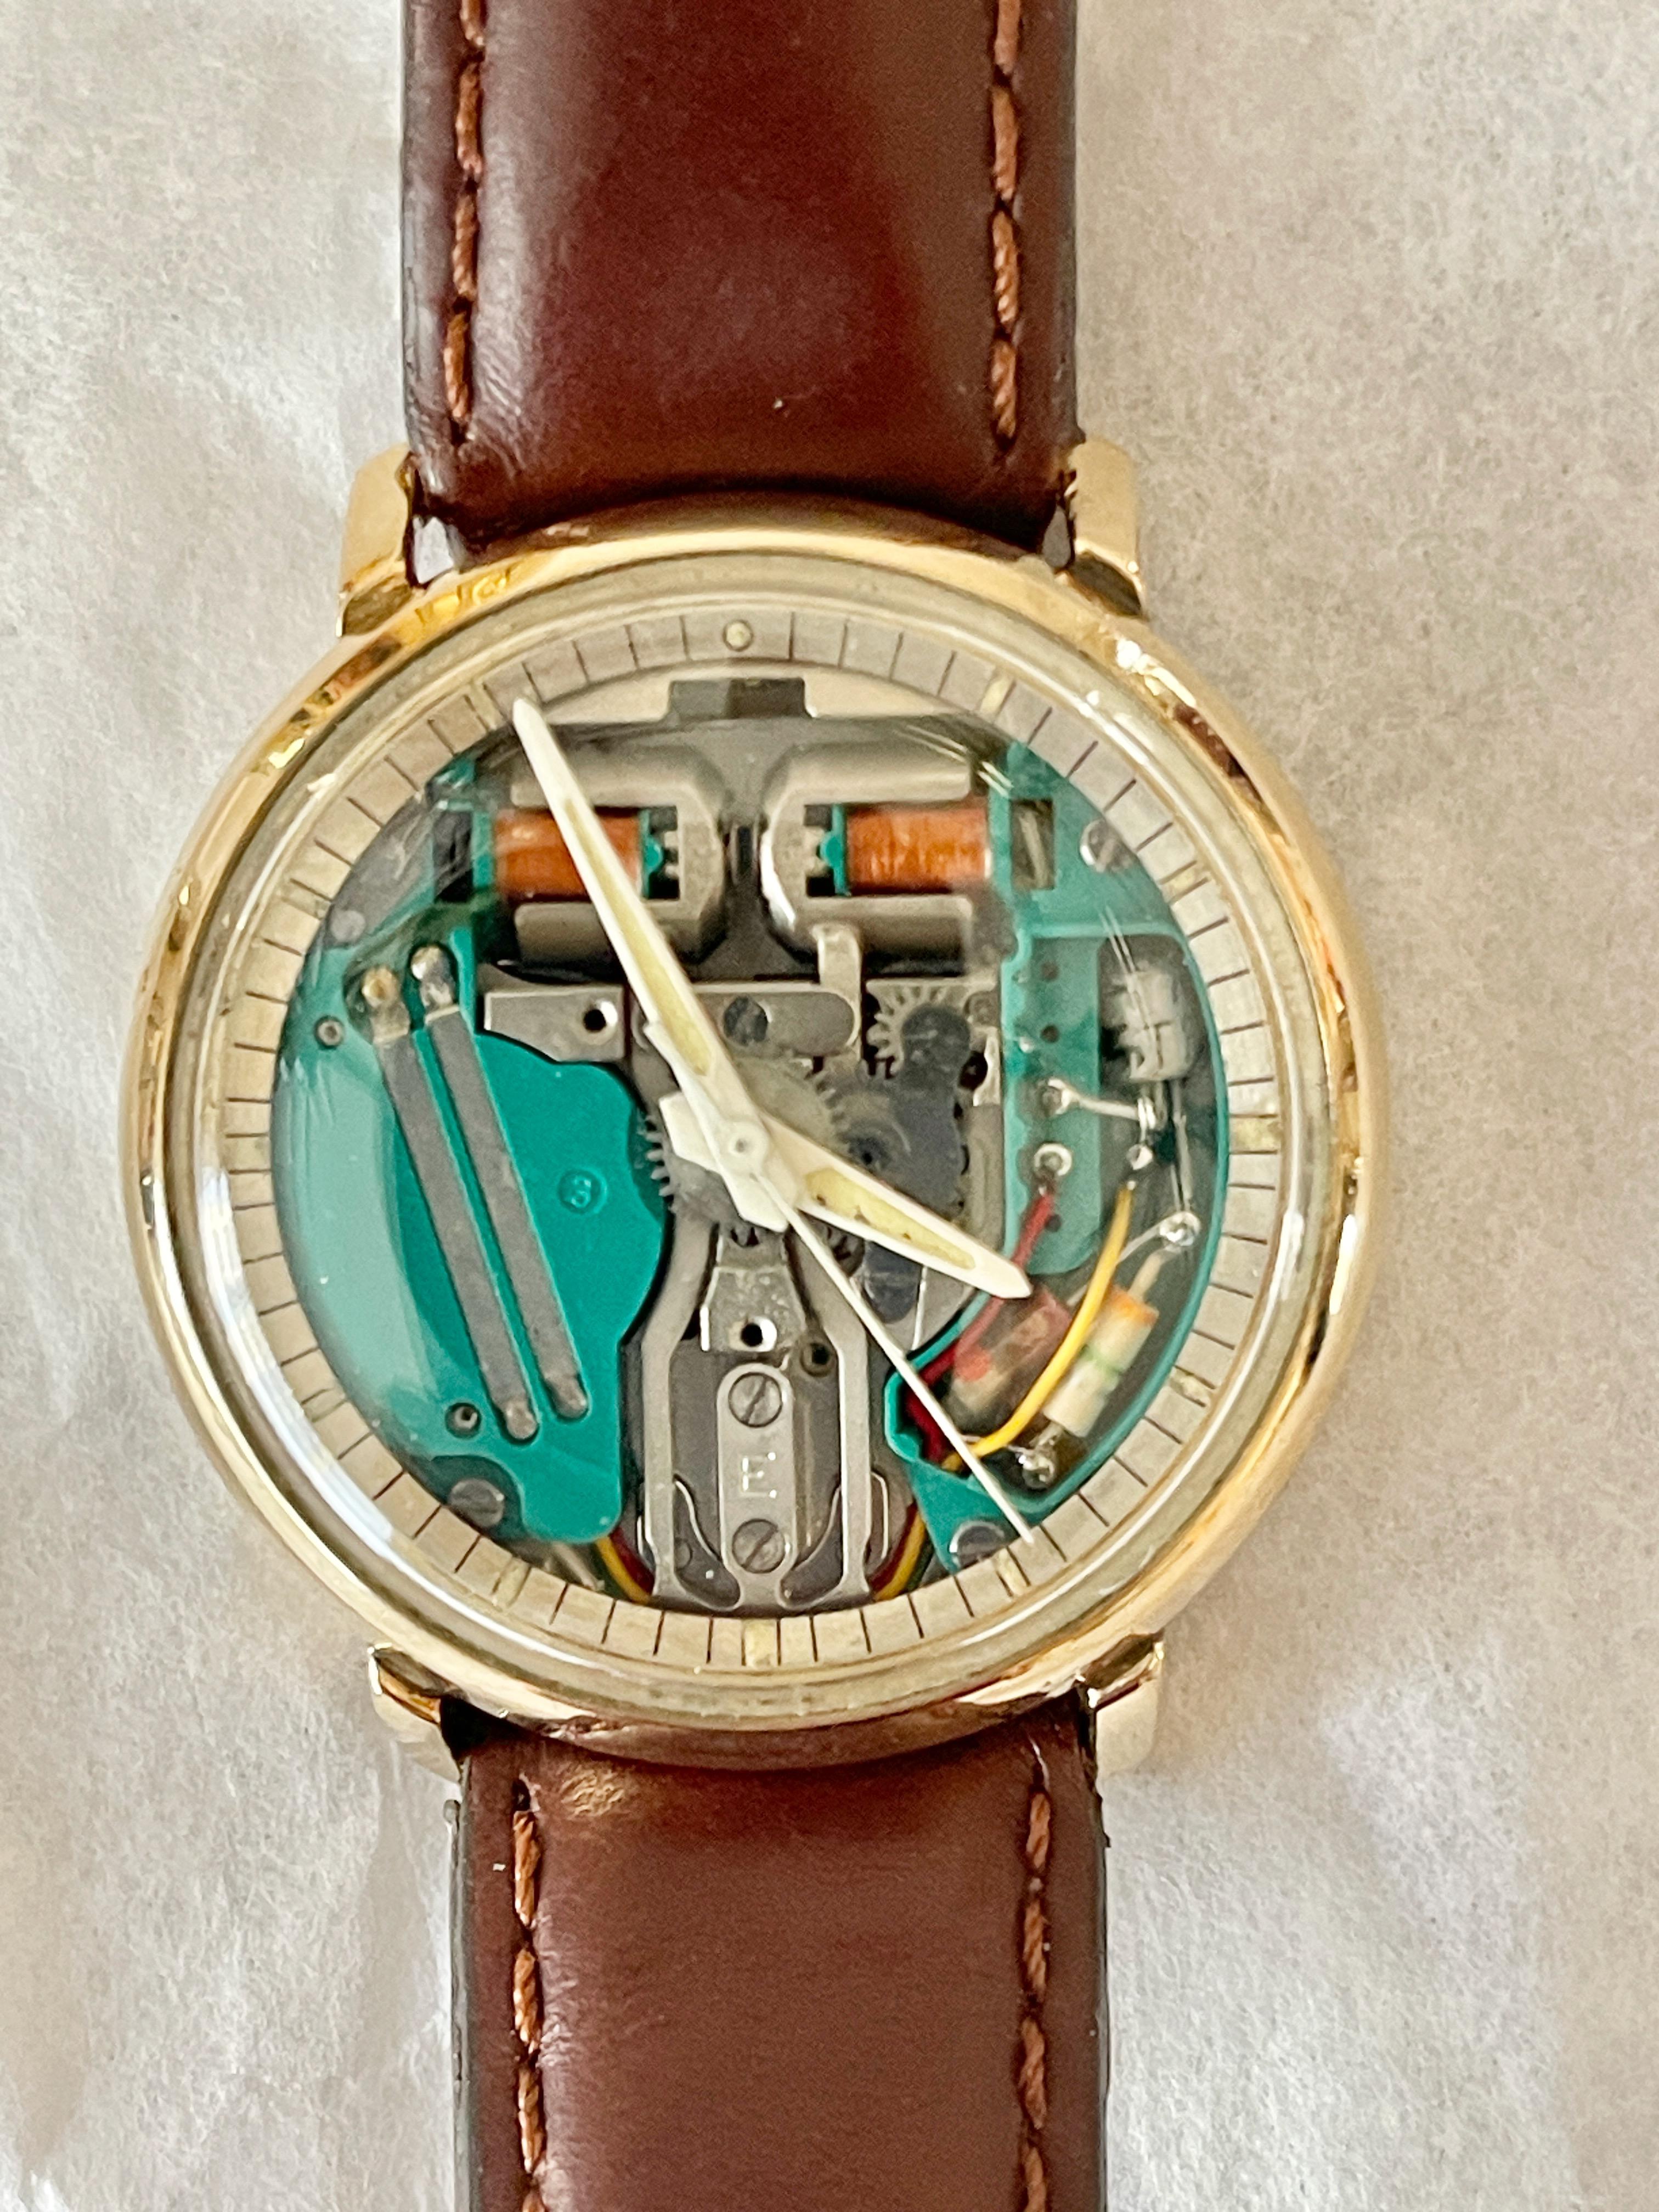 https://a.1stdibscdn.com/bulova-214-accutron-spaceview-mens-watch-for-sale-picture-2/f_8866/f_375840421702661715362/IMG_0099_master.jpeg